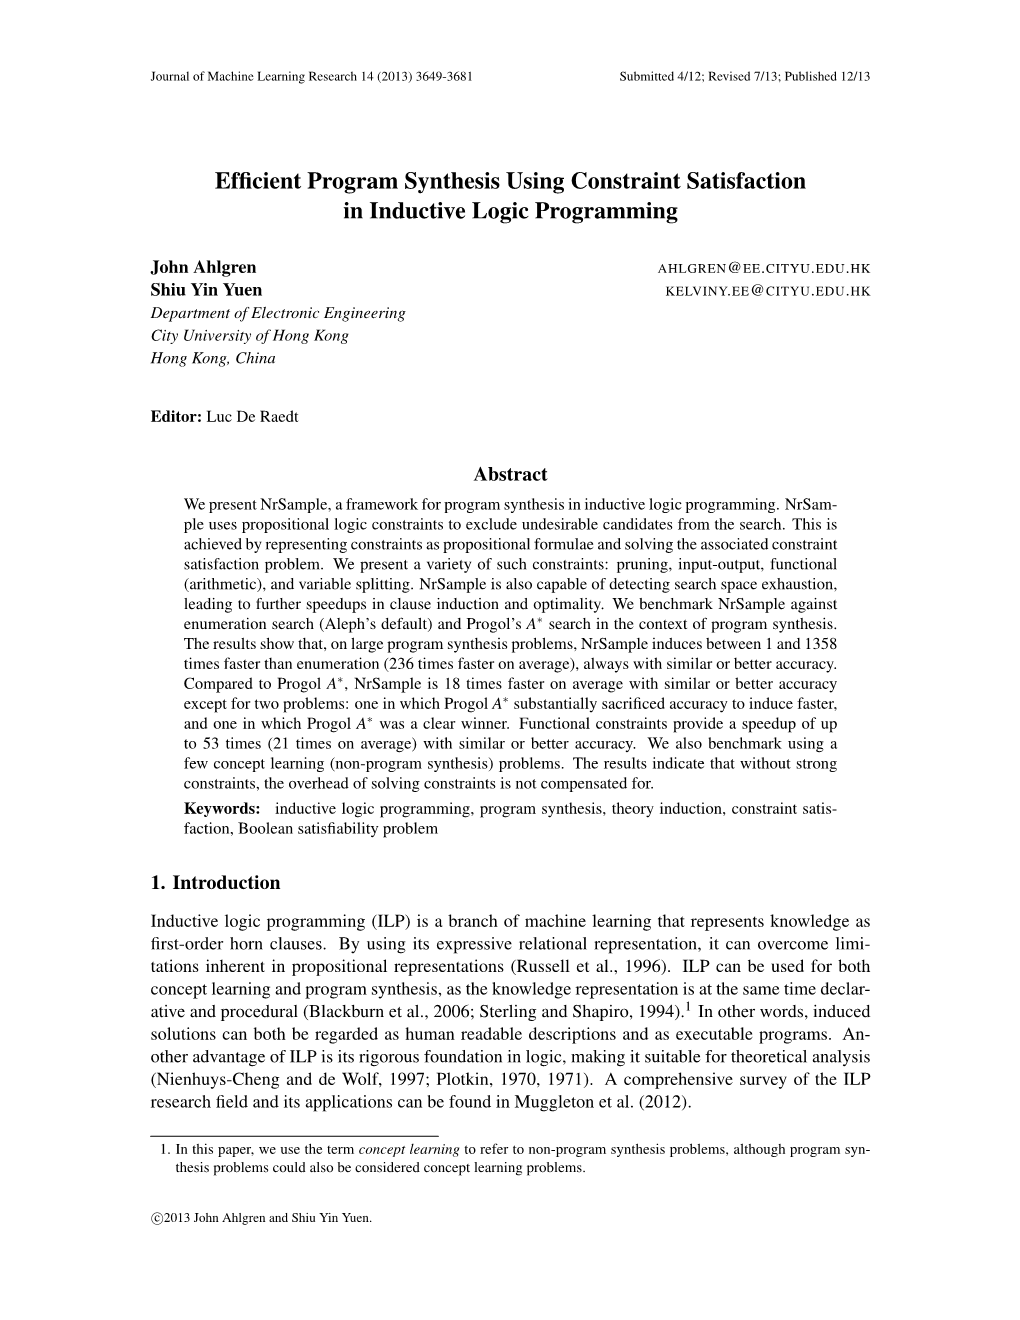 Efficient Program Synthesis Using Constraint Satisfaction in Inductive